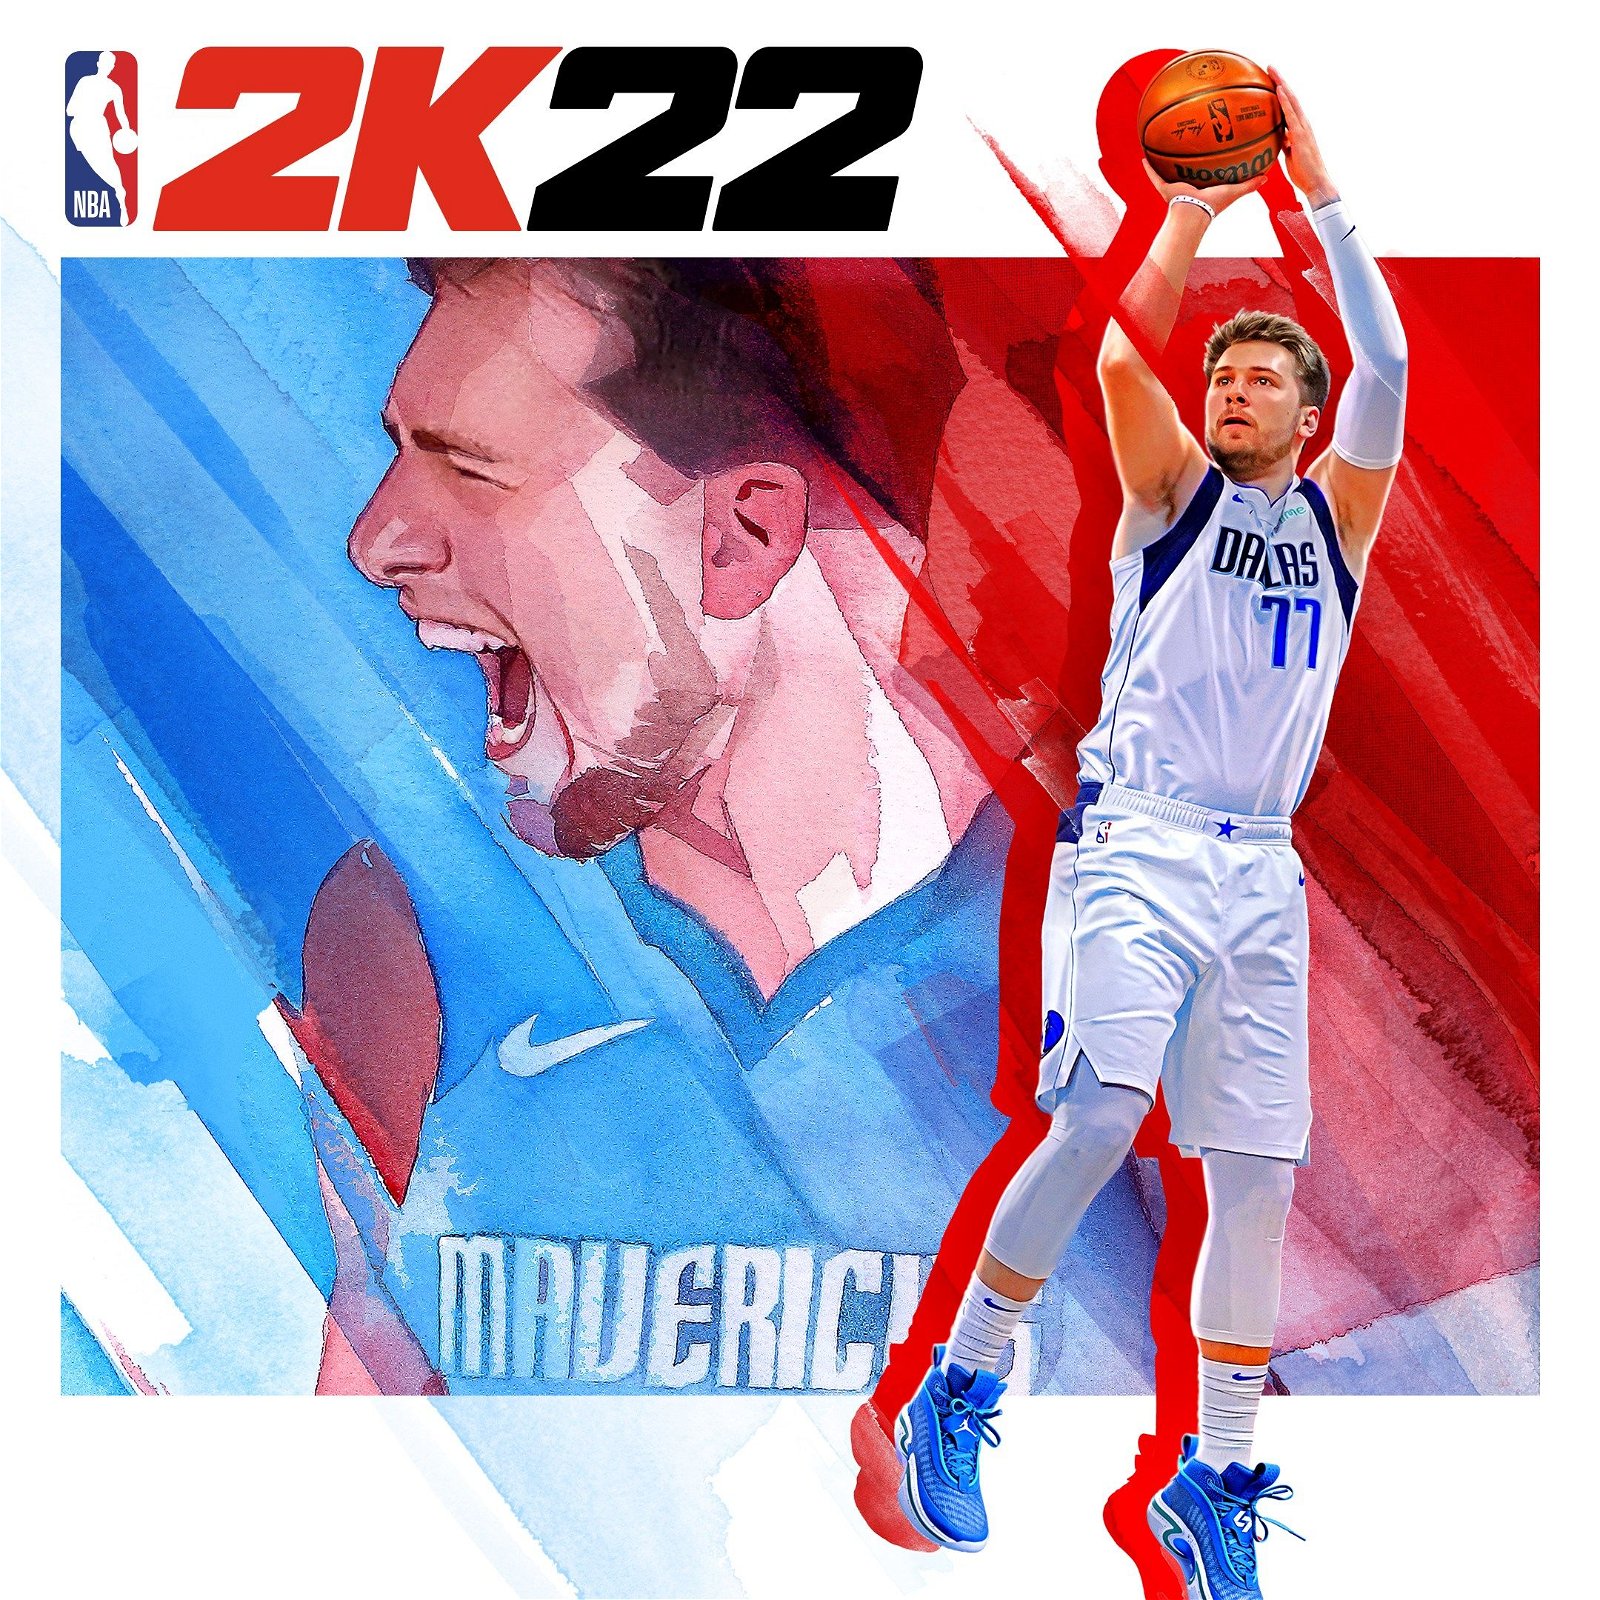 Image of NBA 2K22 for